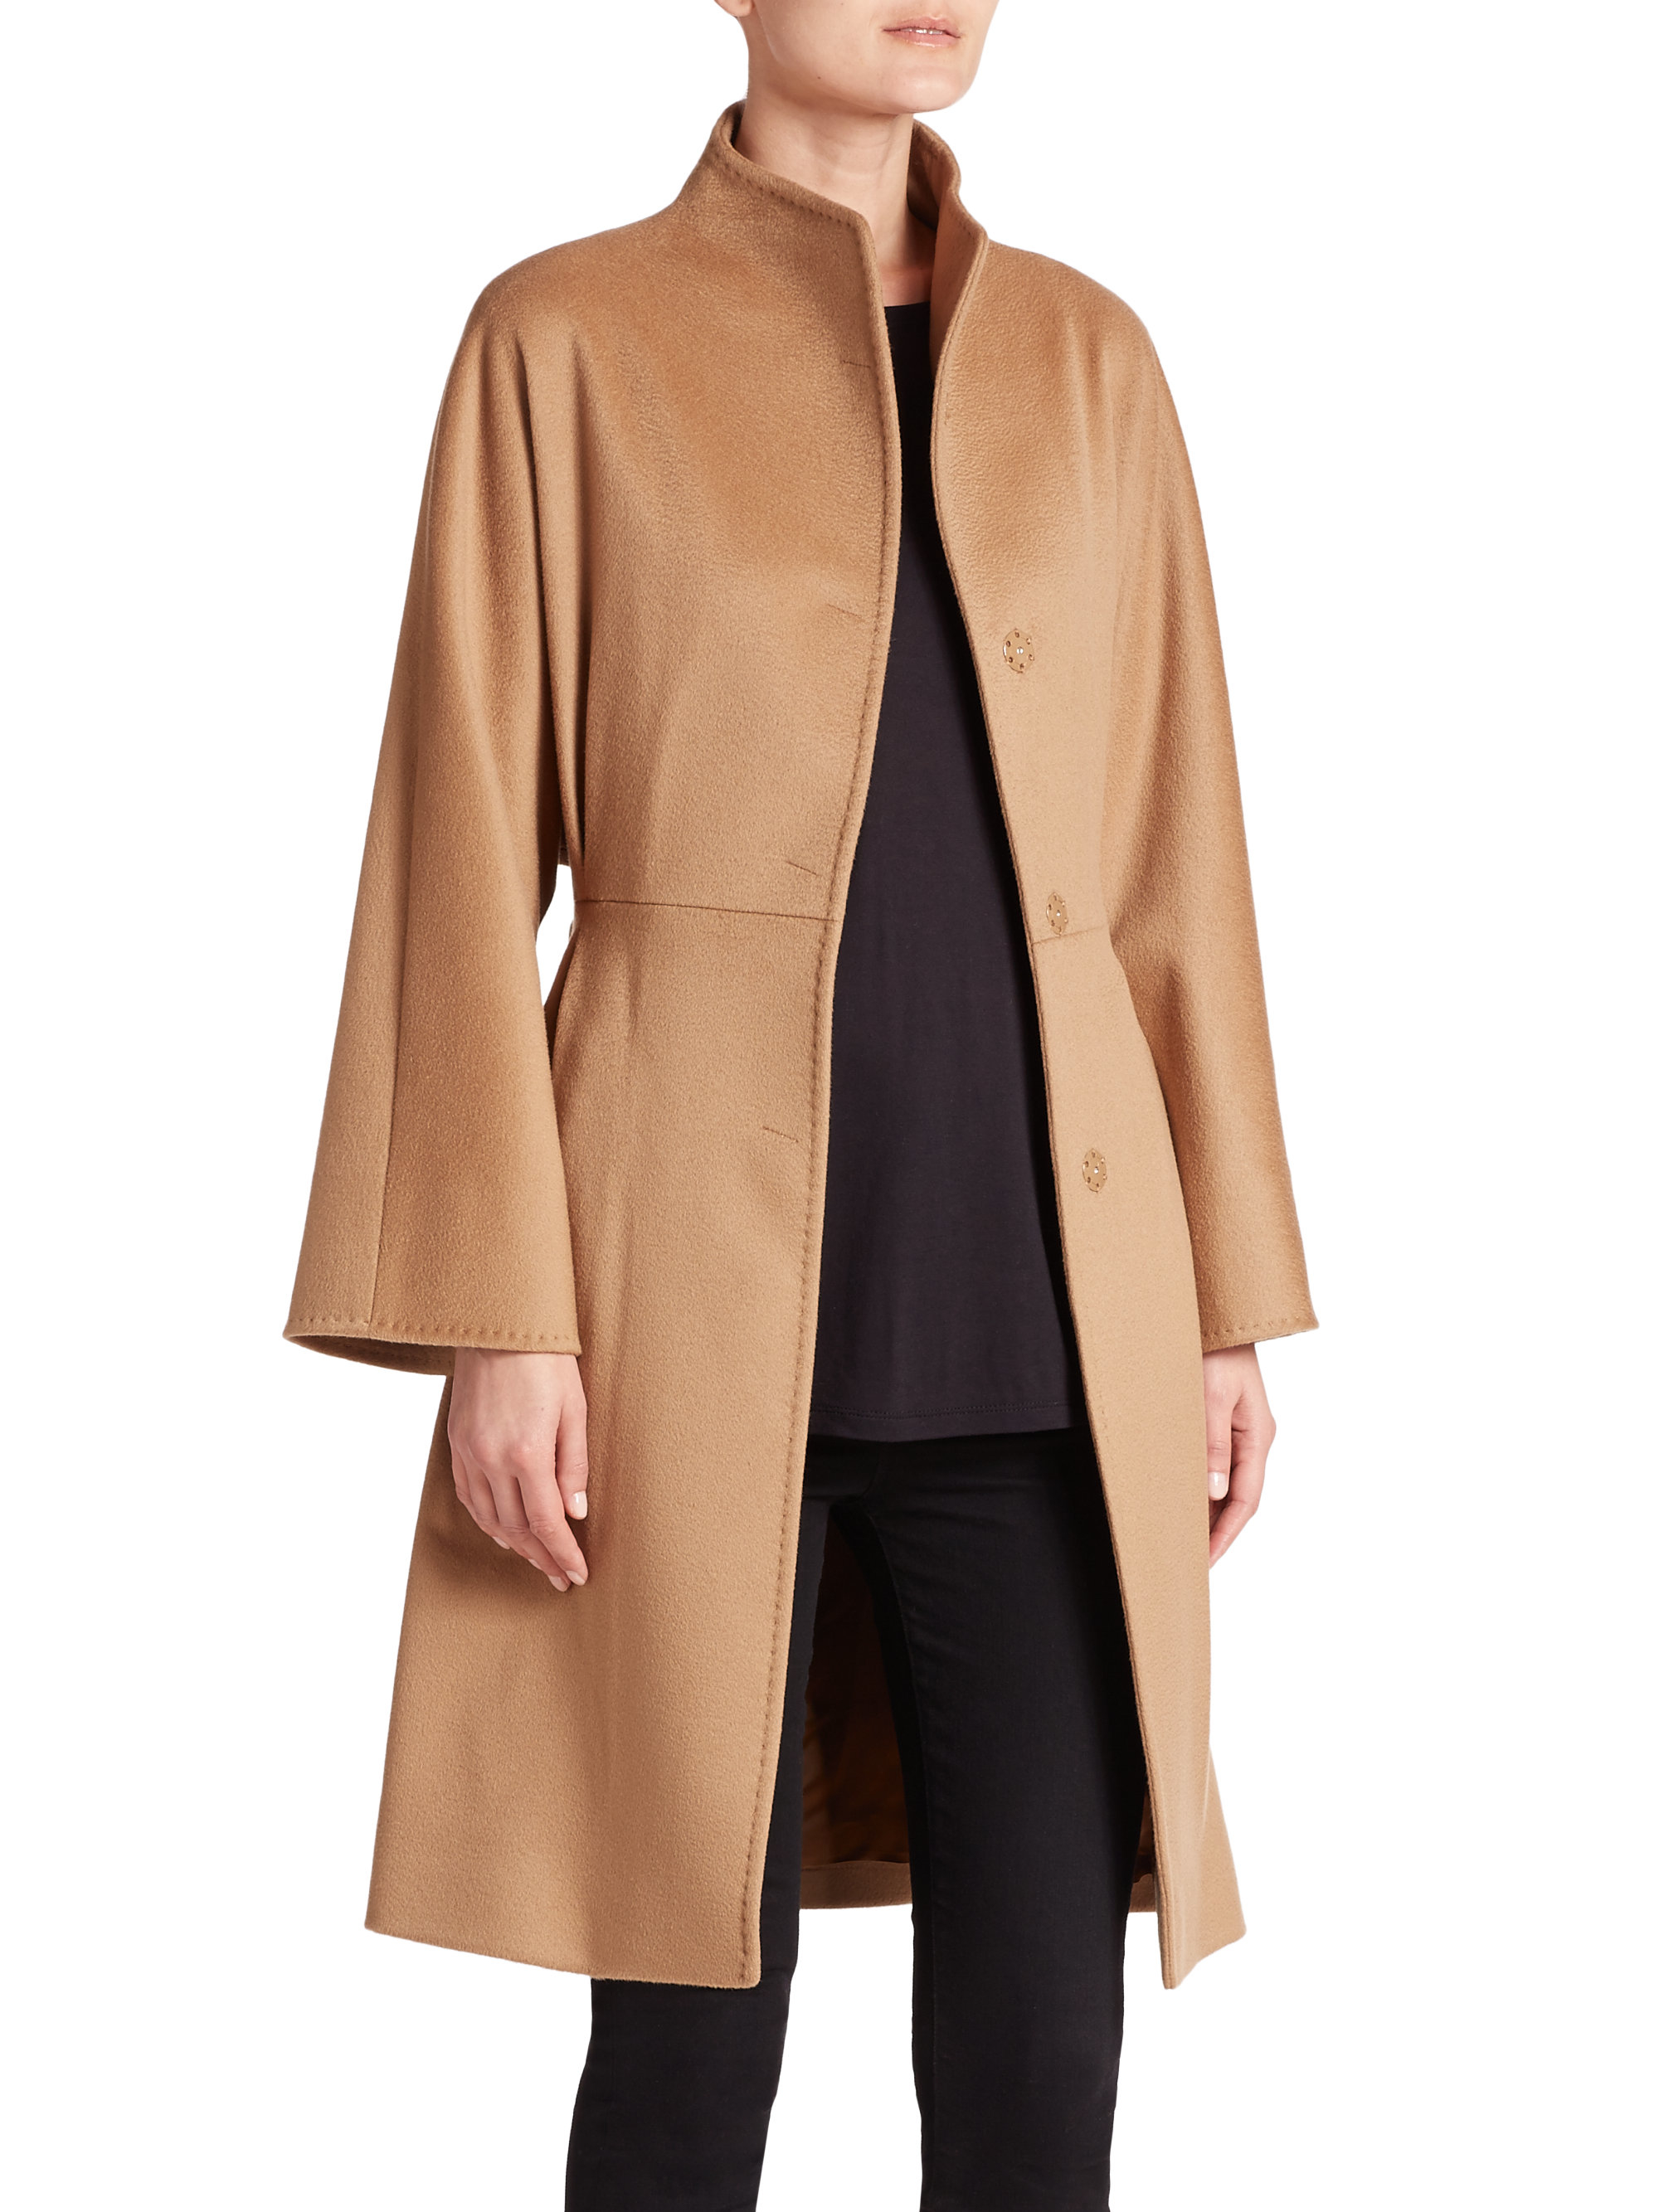 Cinzia rocca Belted Wool Coat in Natural | Lyst